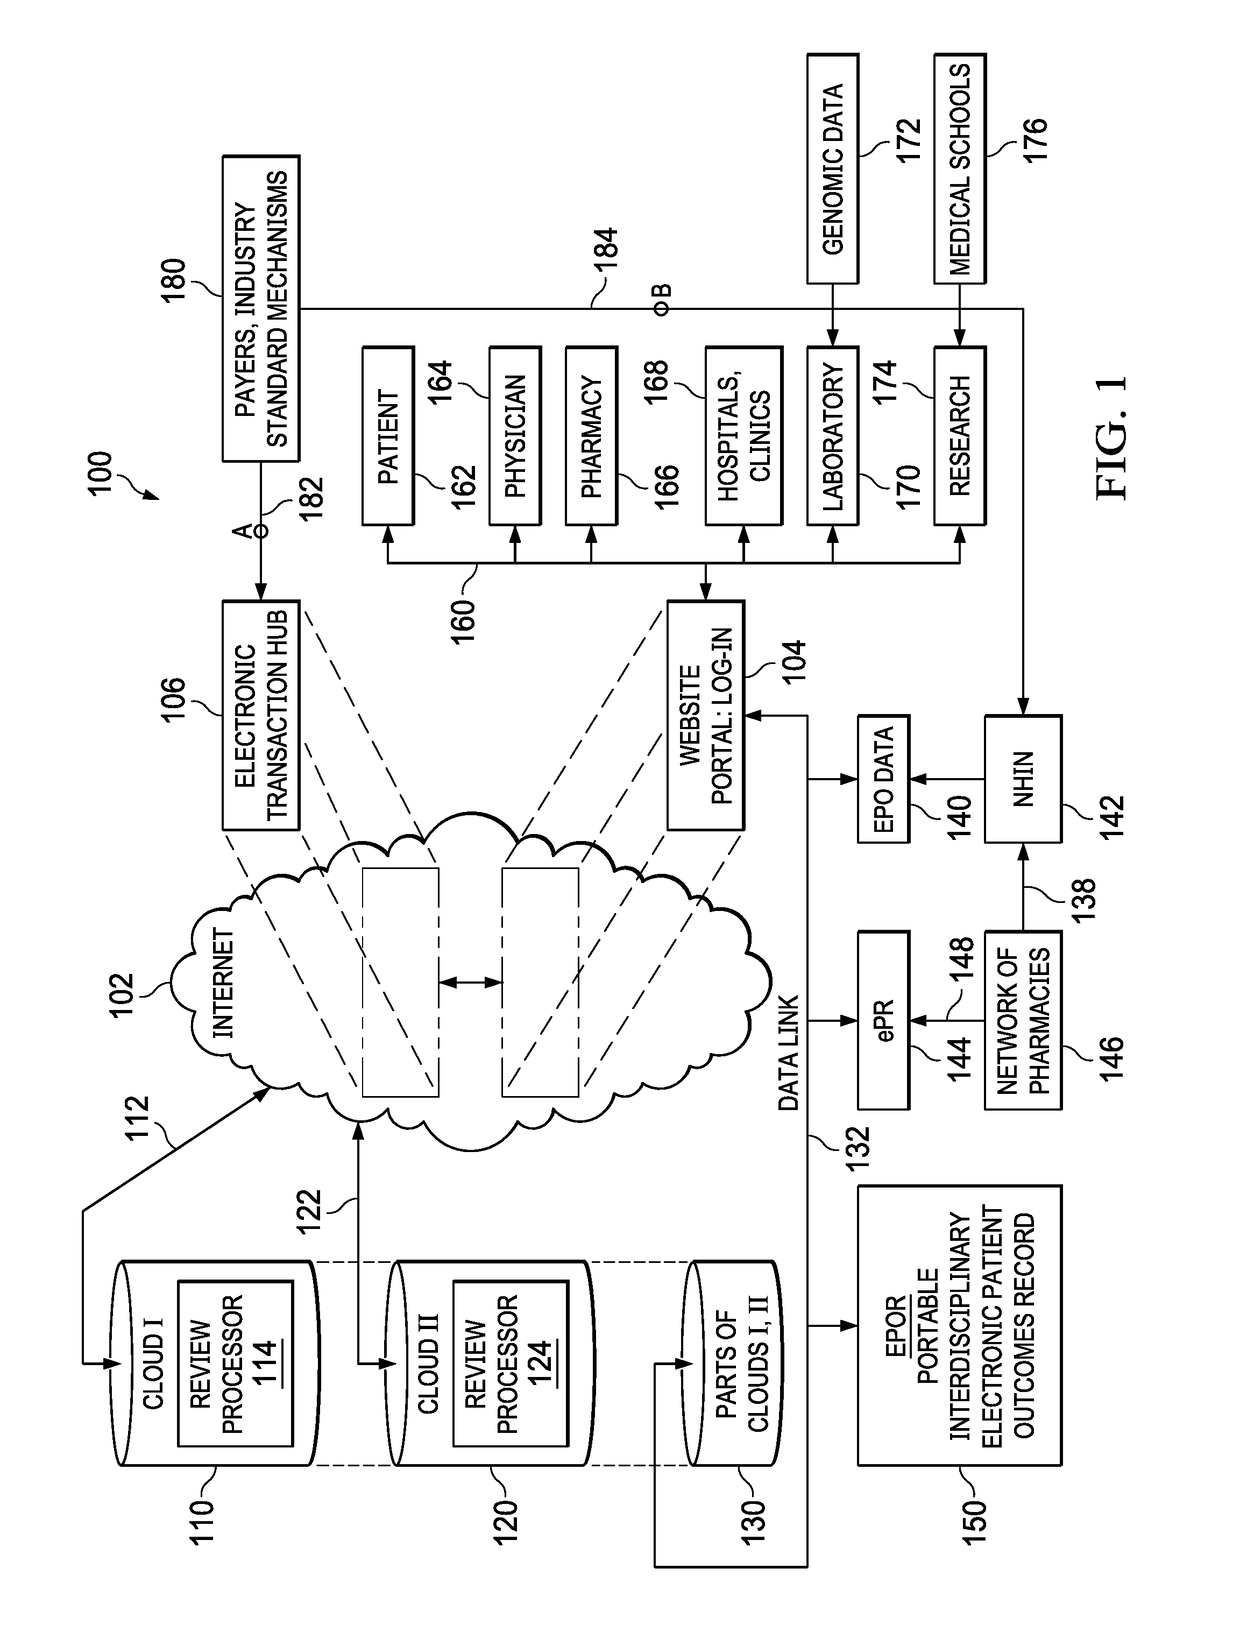 Methods for Processing Submission and Fulfillment of Pharmaceutical Prescriptions in Real Time